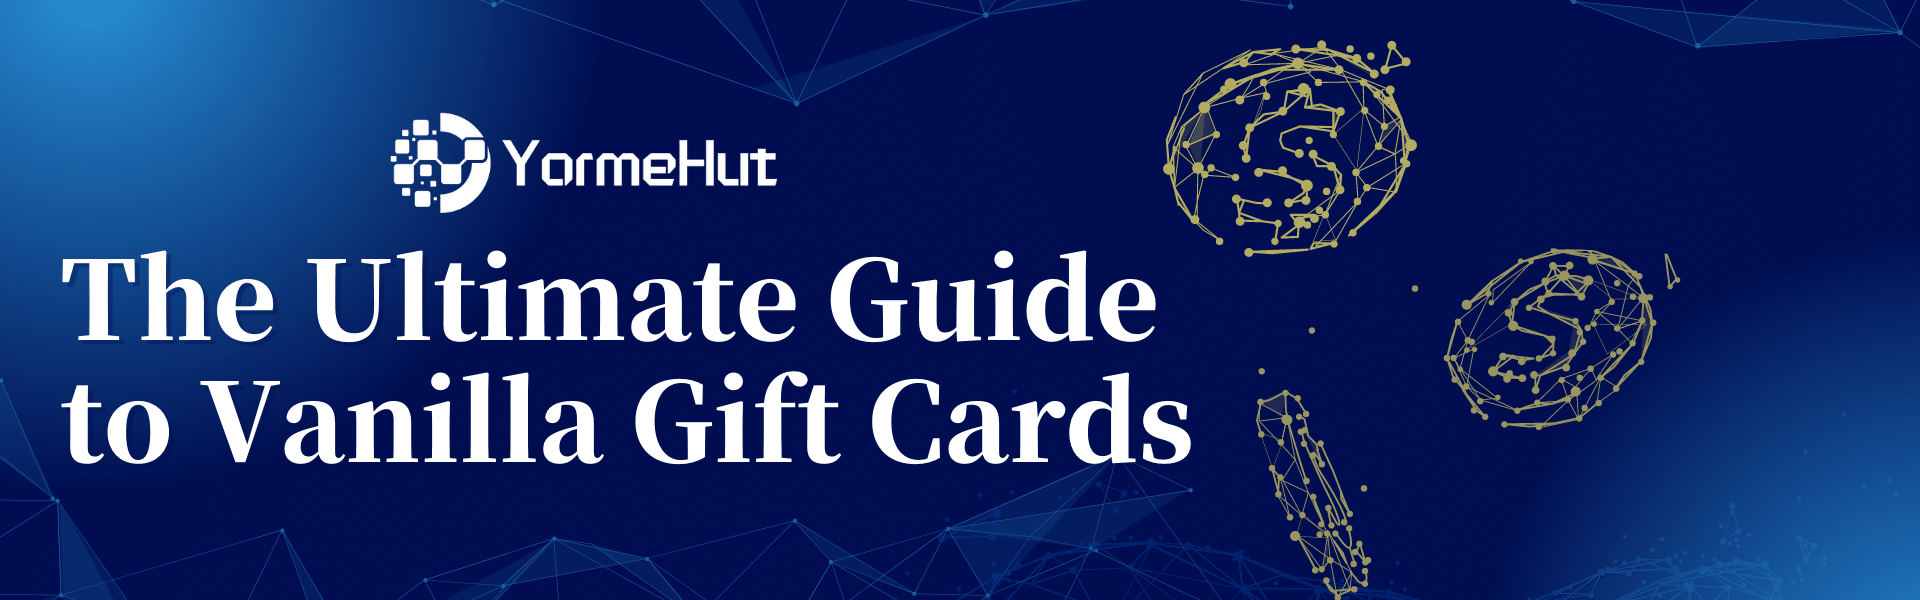 The Ultimate Guide to Vanilla Gift Cards